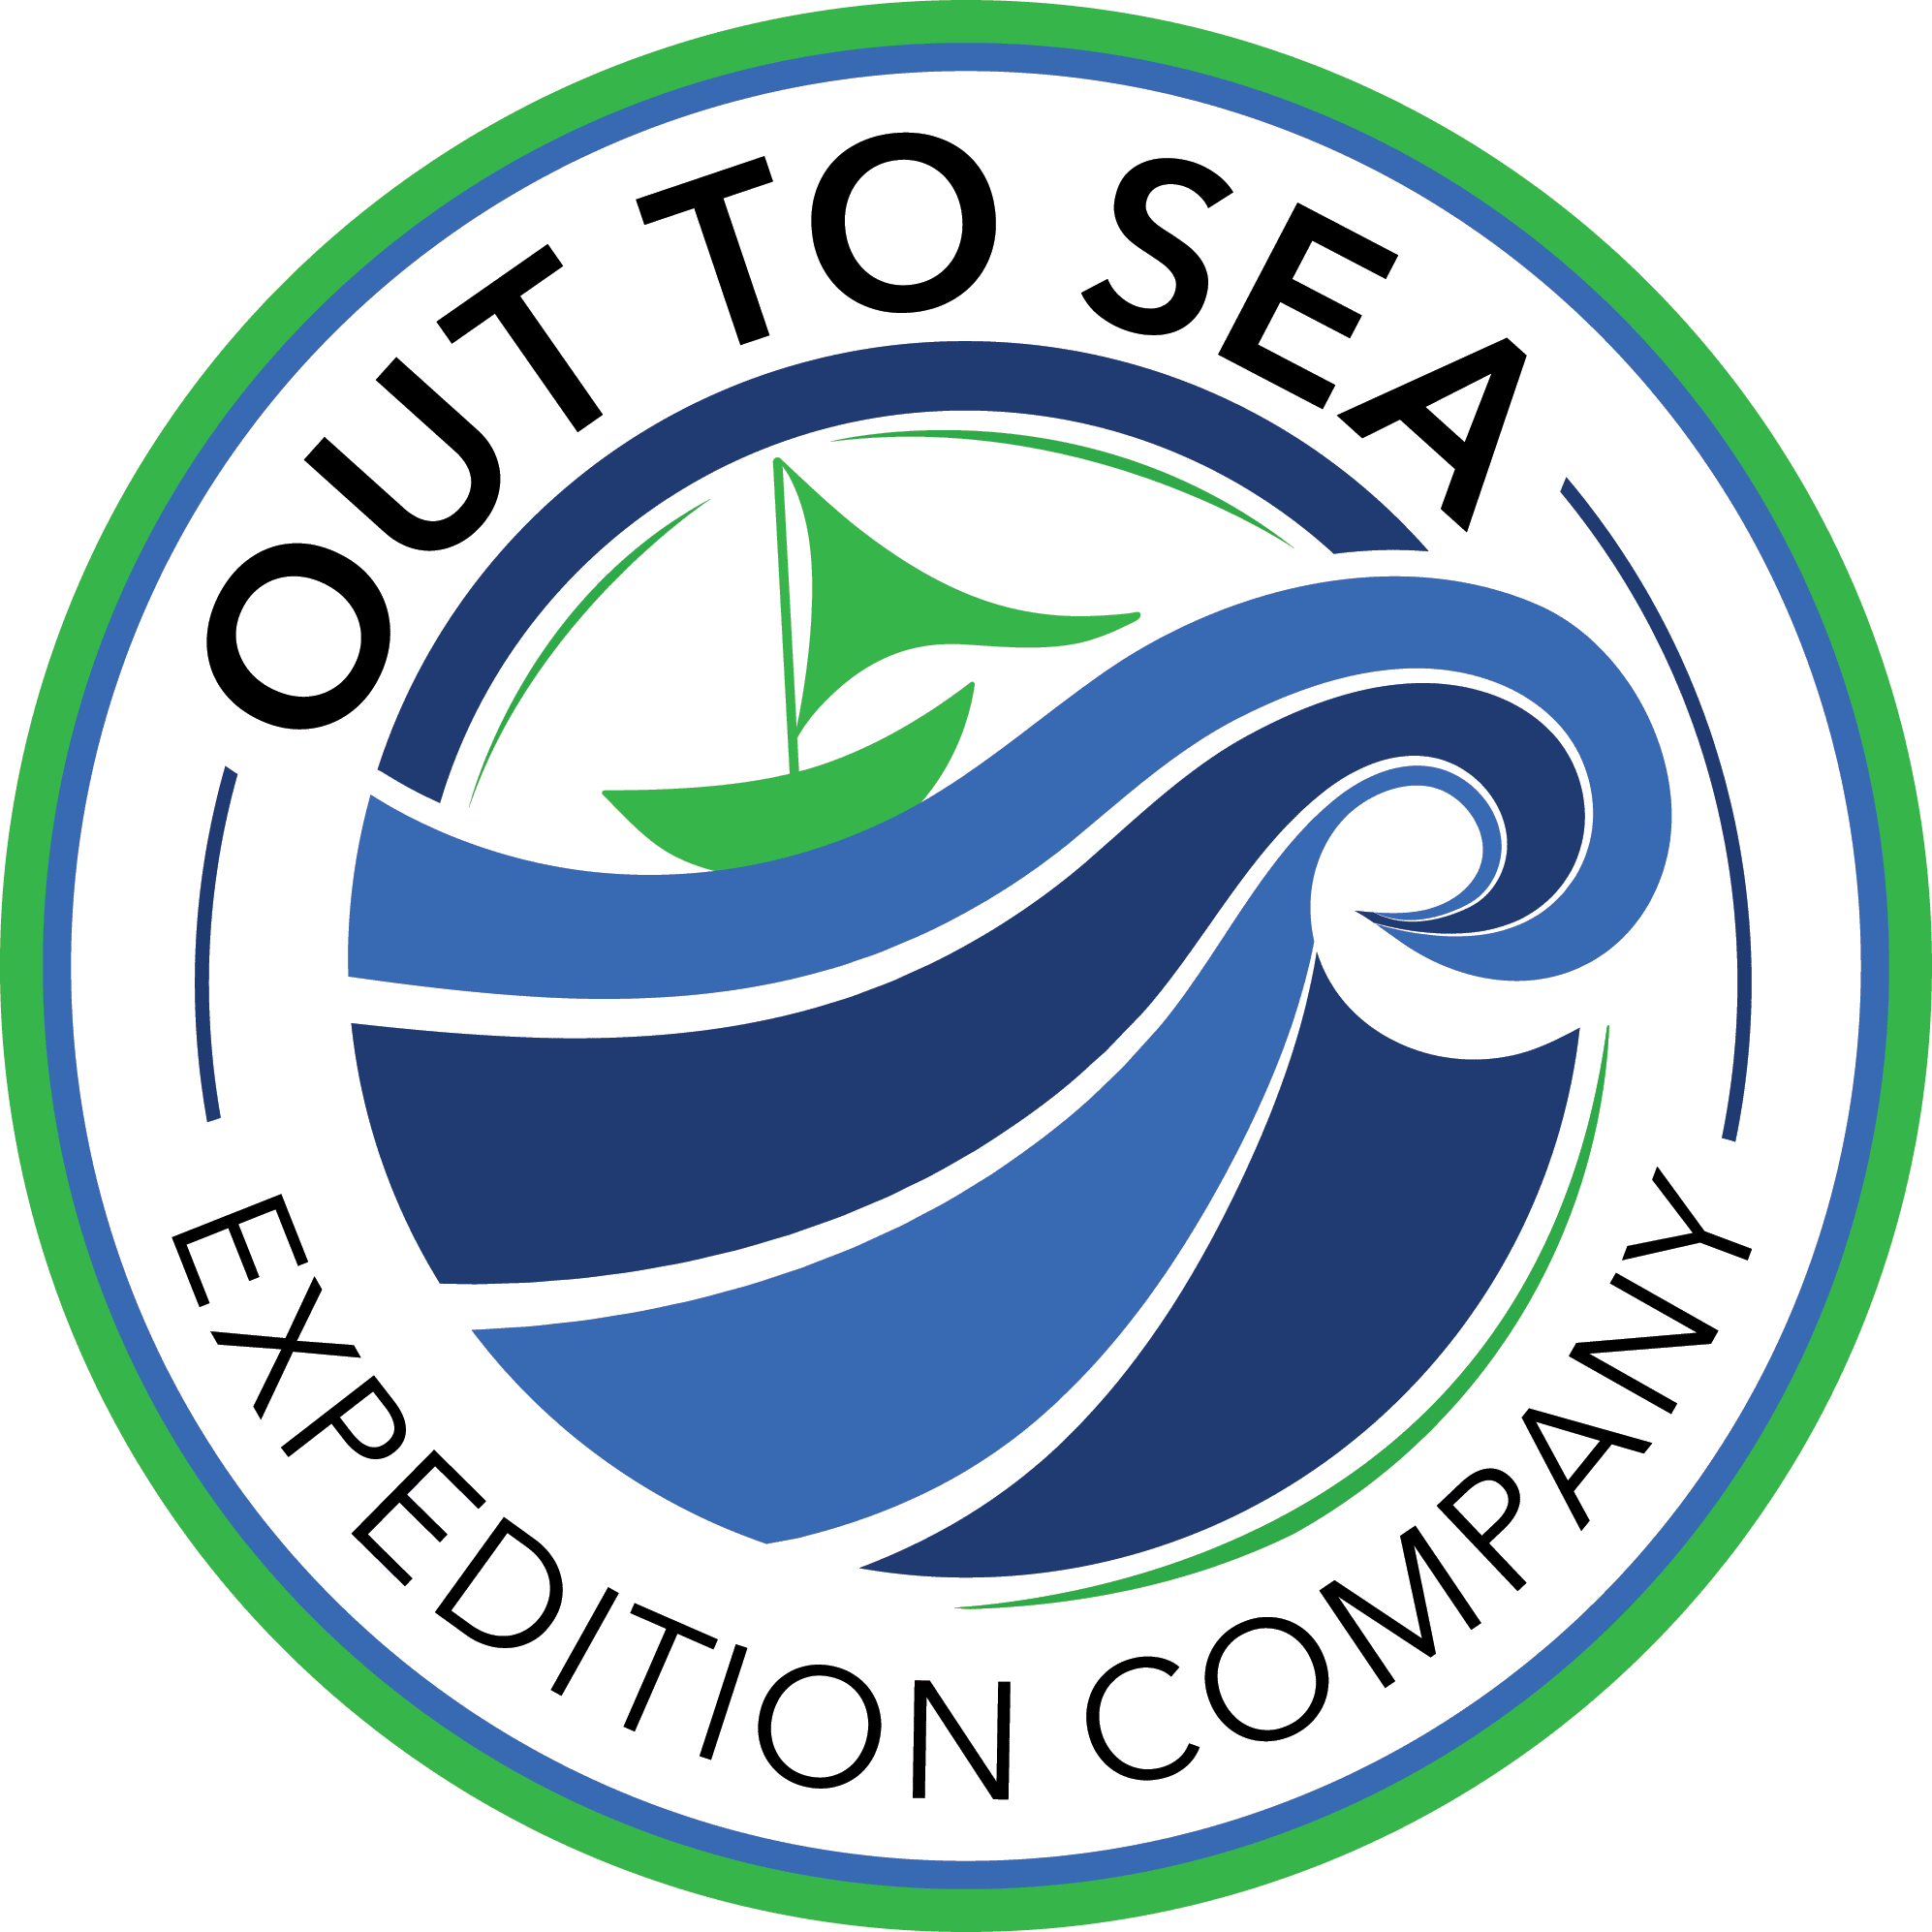 Out to Sea Expedition Company logo featuring a circle with a sailboat riding a big wave in the middle and the name of the company curves around in a circle with Out to Sea at the top and Expedition Company at the bottom.